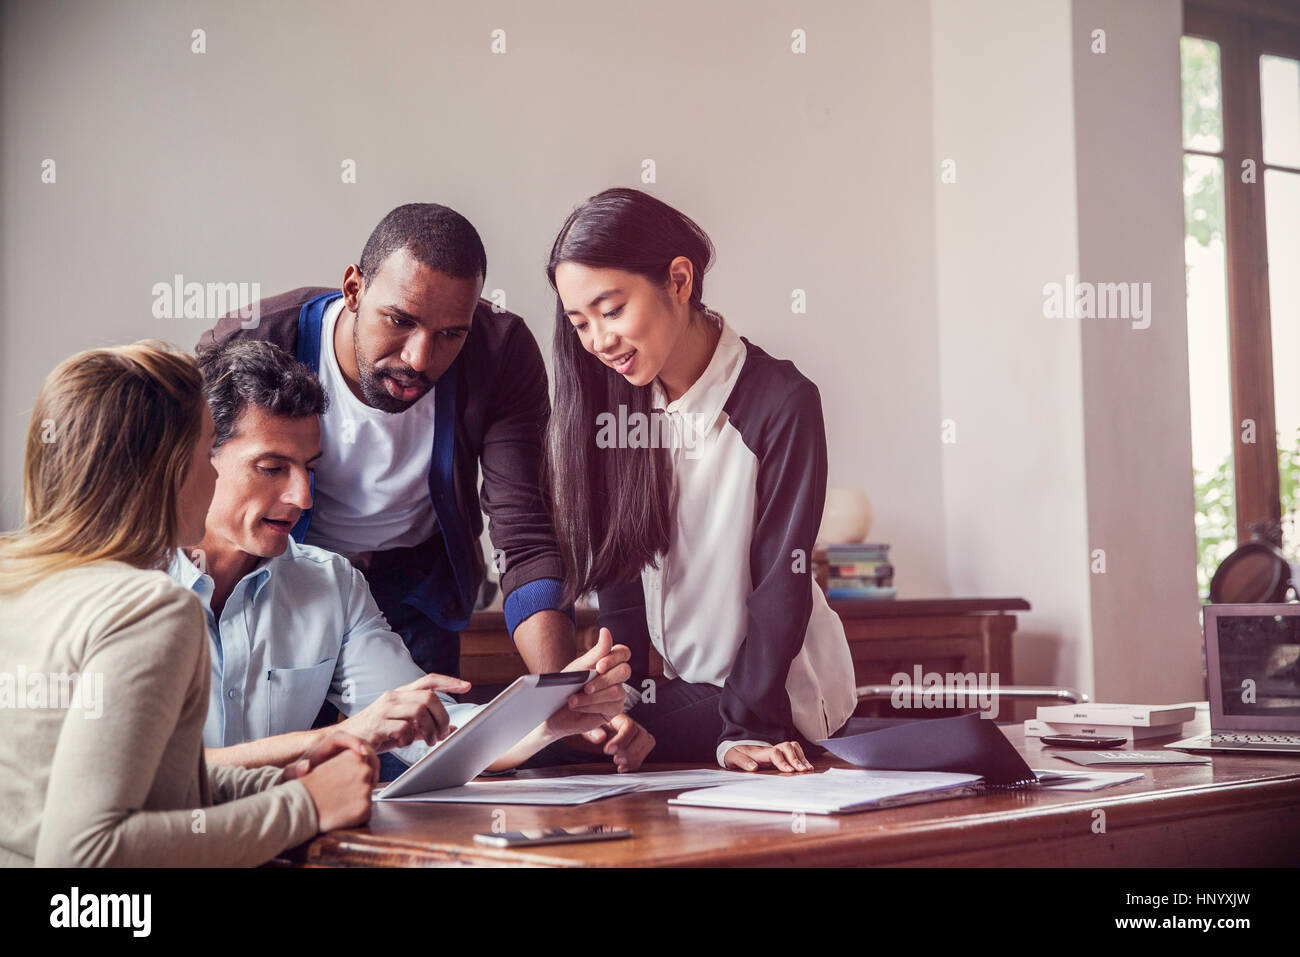 Colleagues looking at digital tablet together in office Stock Photo